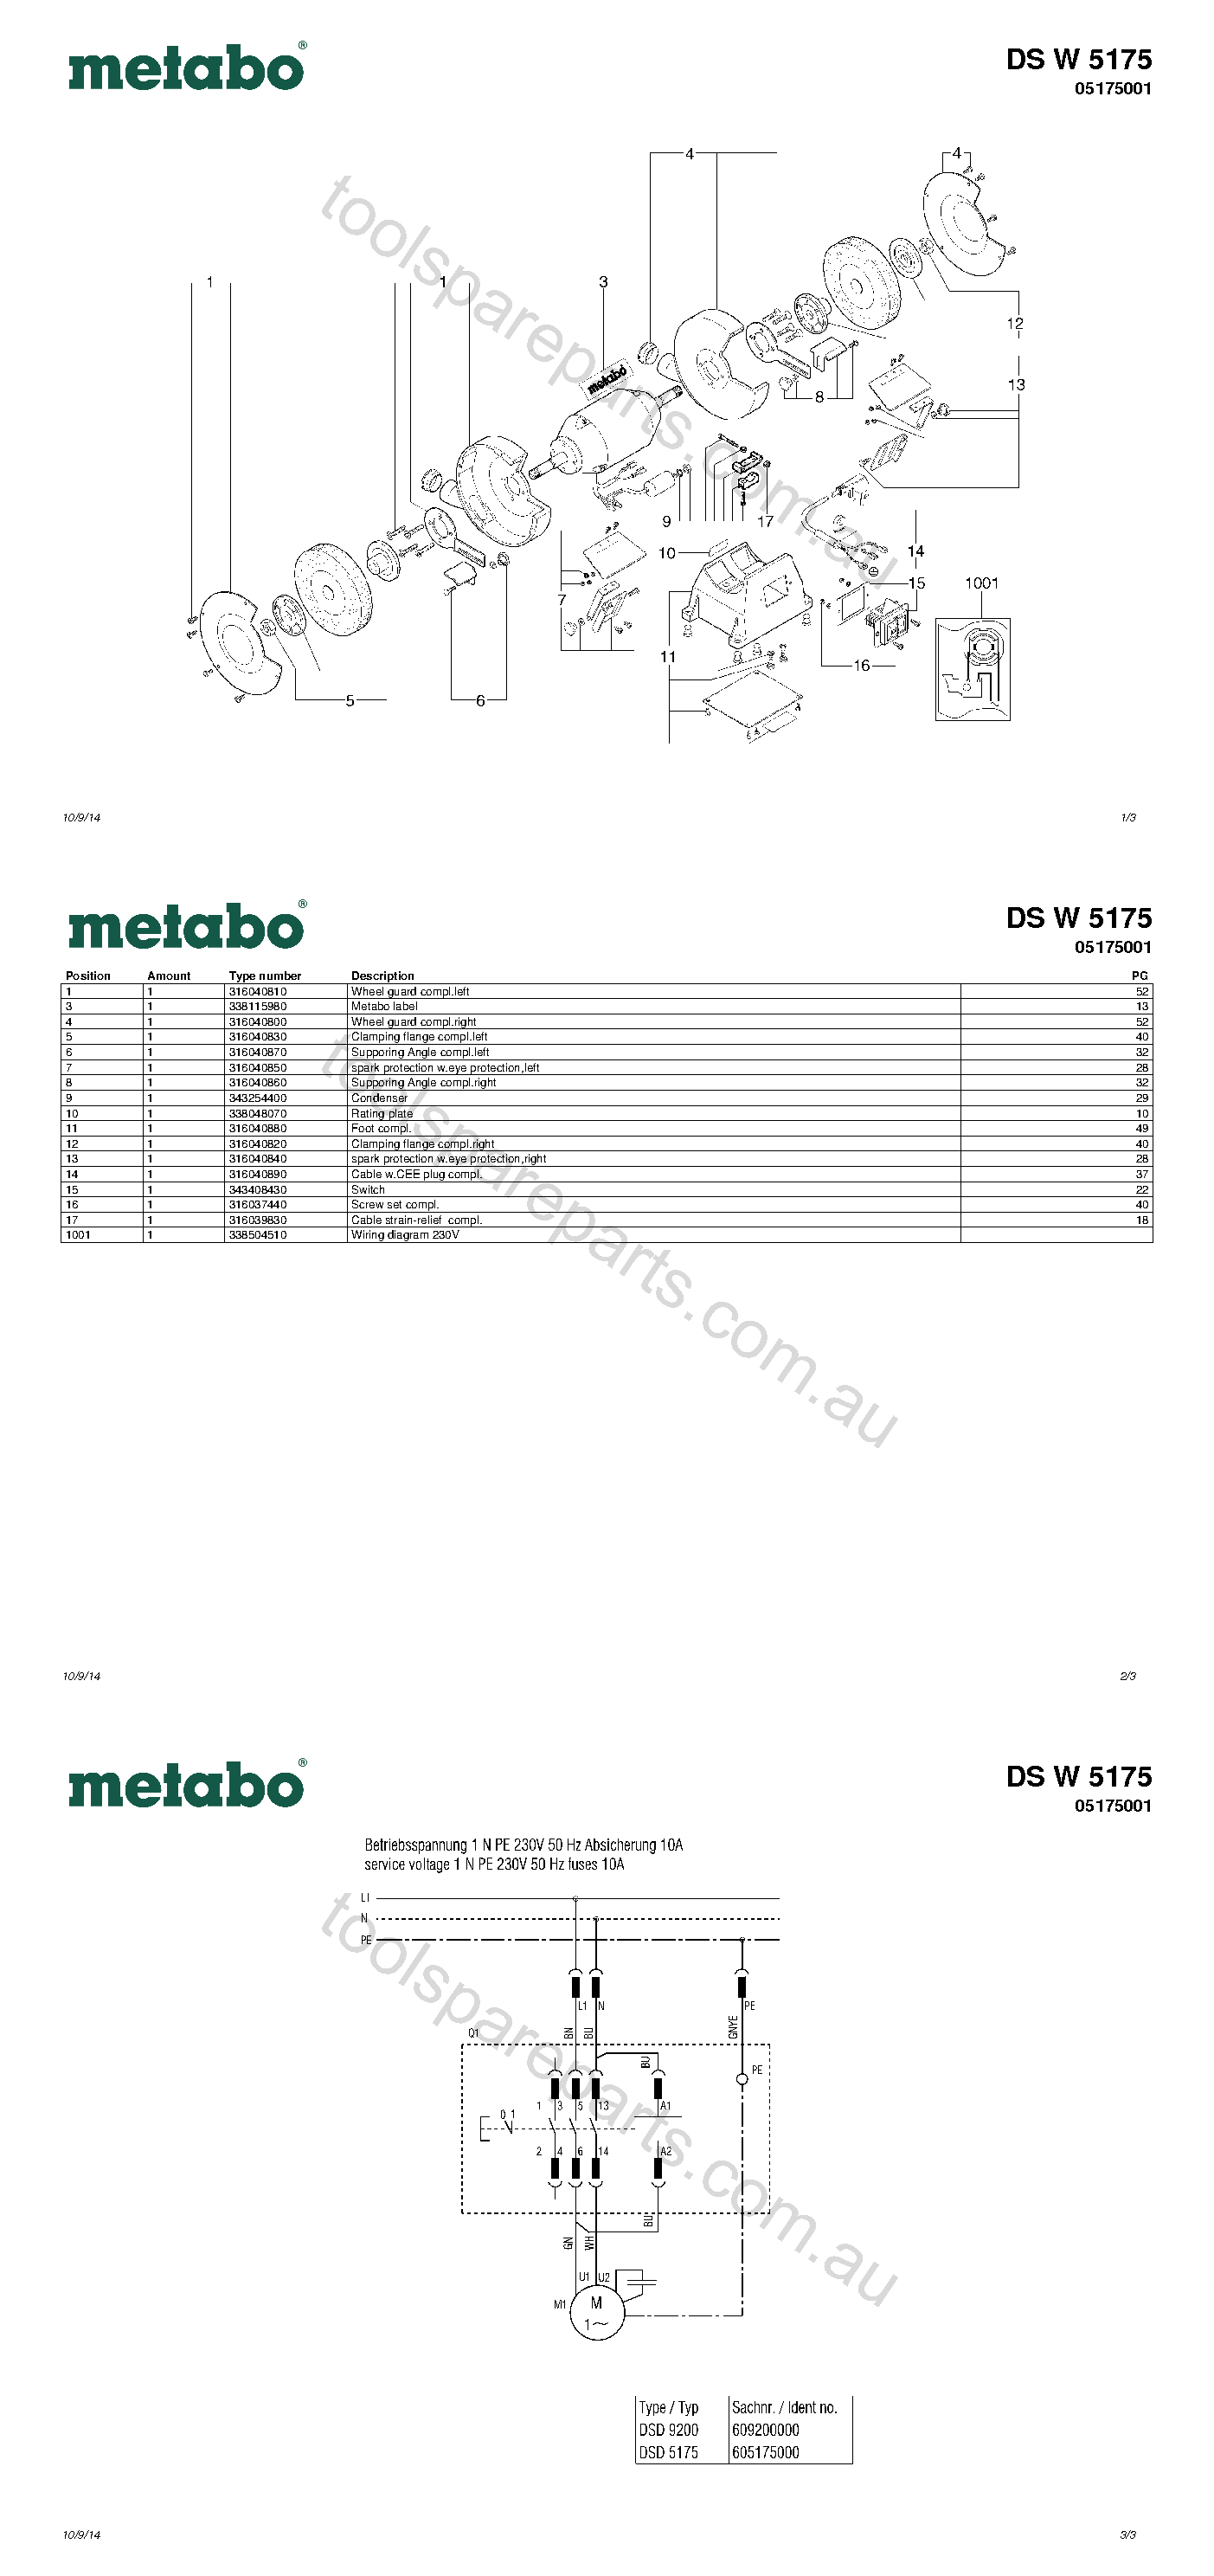 Metabo DS W 5175 05175001  Diagram 1